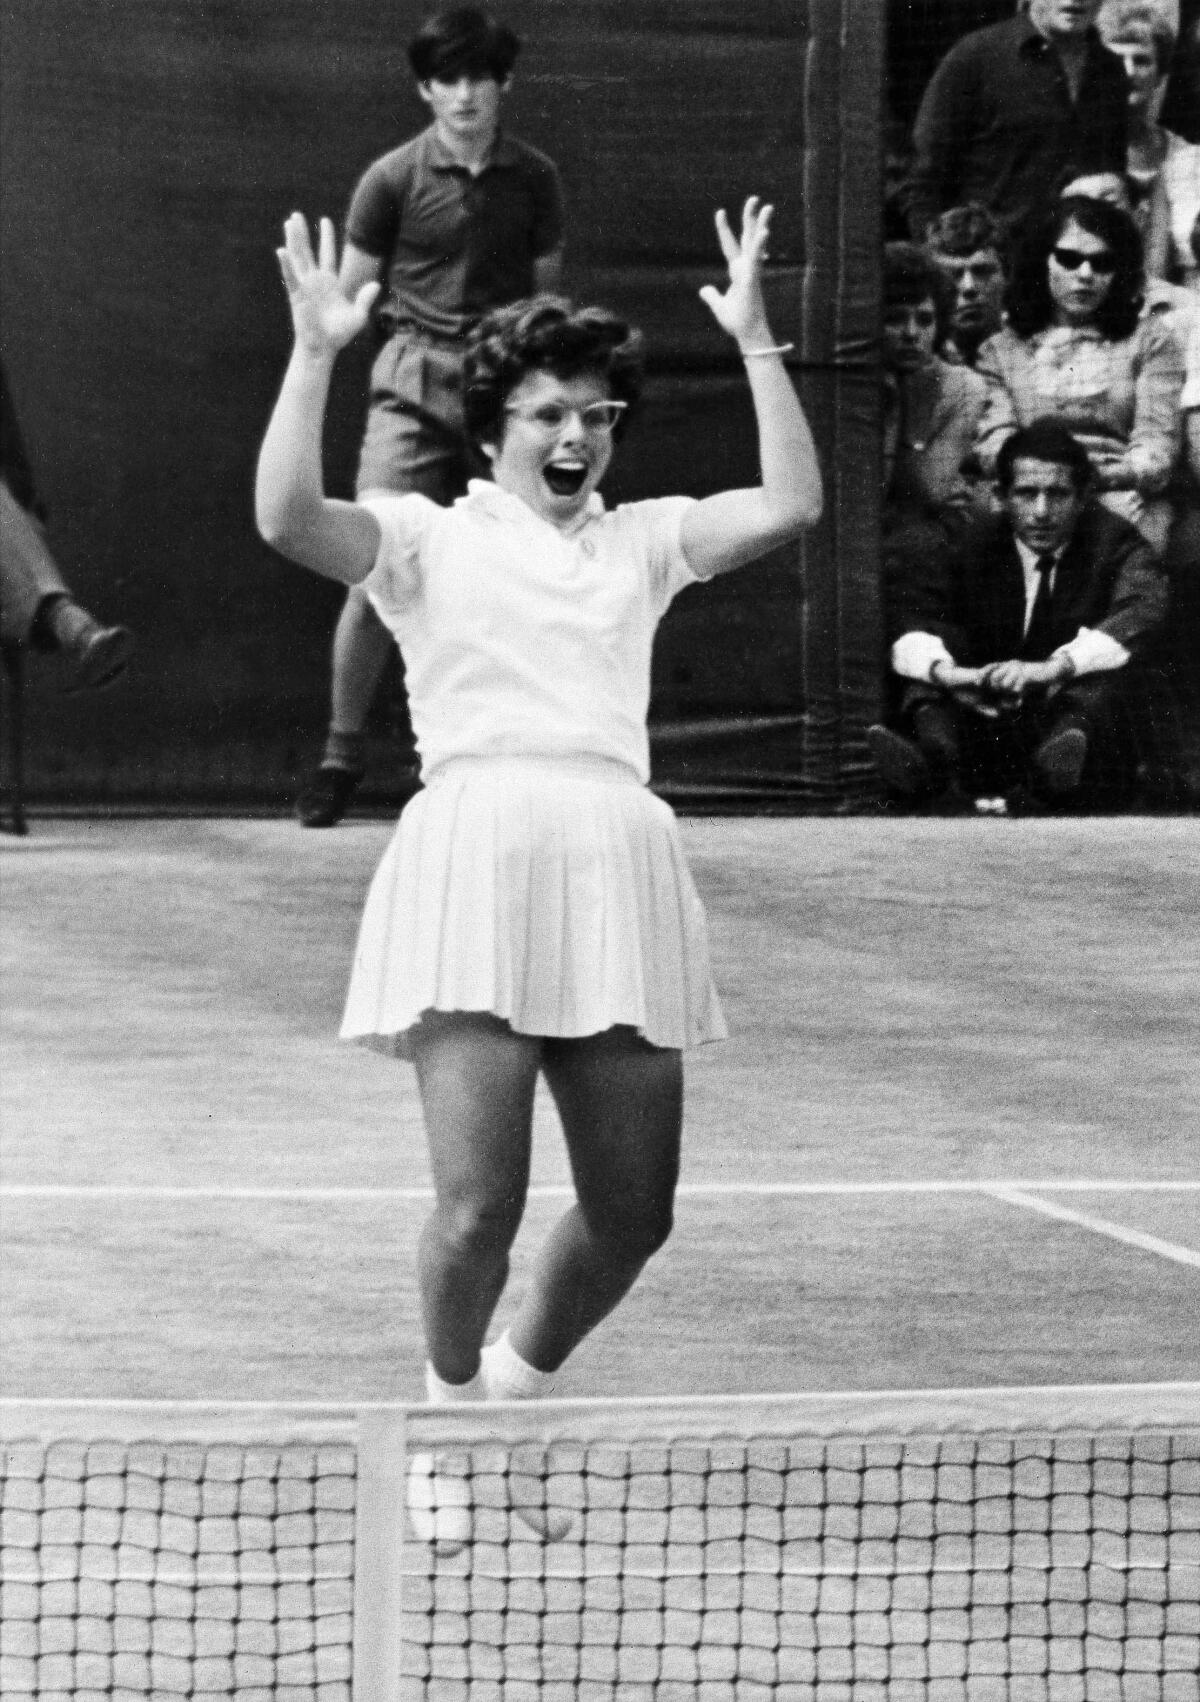 Billie Jean King leaps for joy after her winning shot to clinch the Wimbledon singles title in London, July 2, 1966.